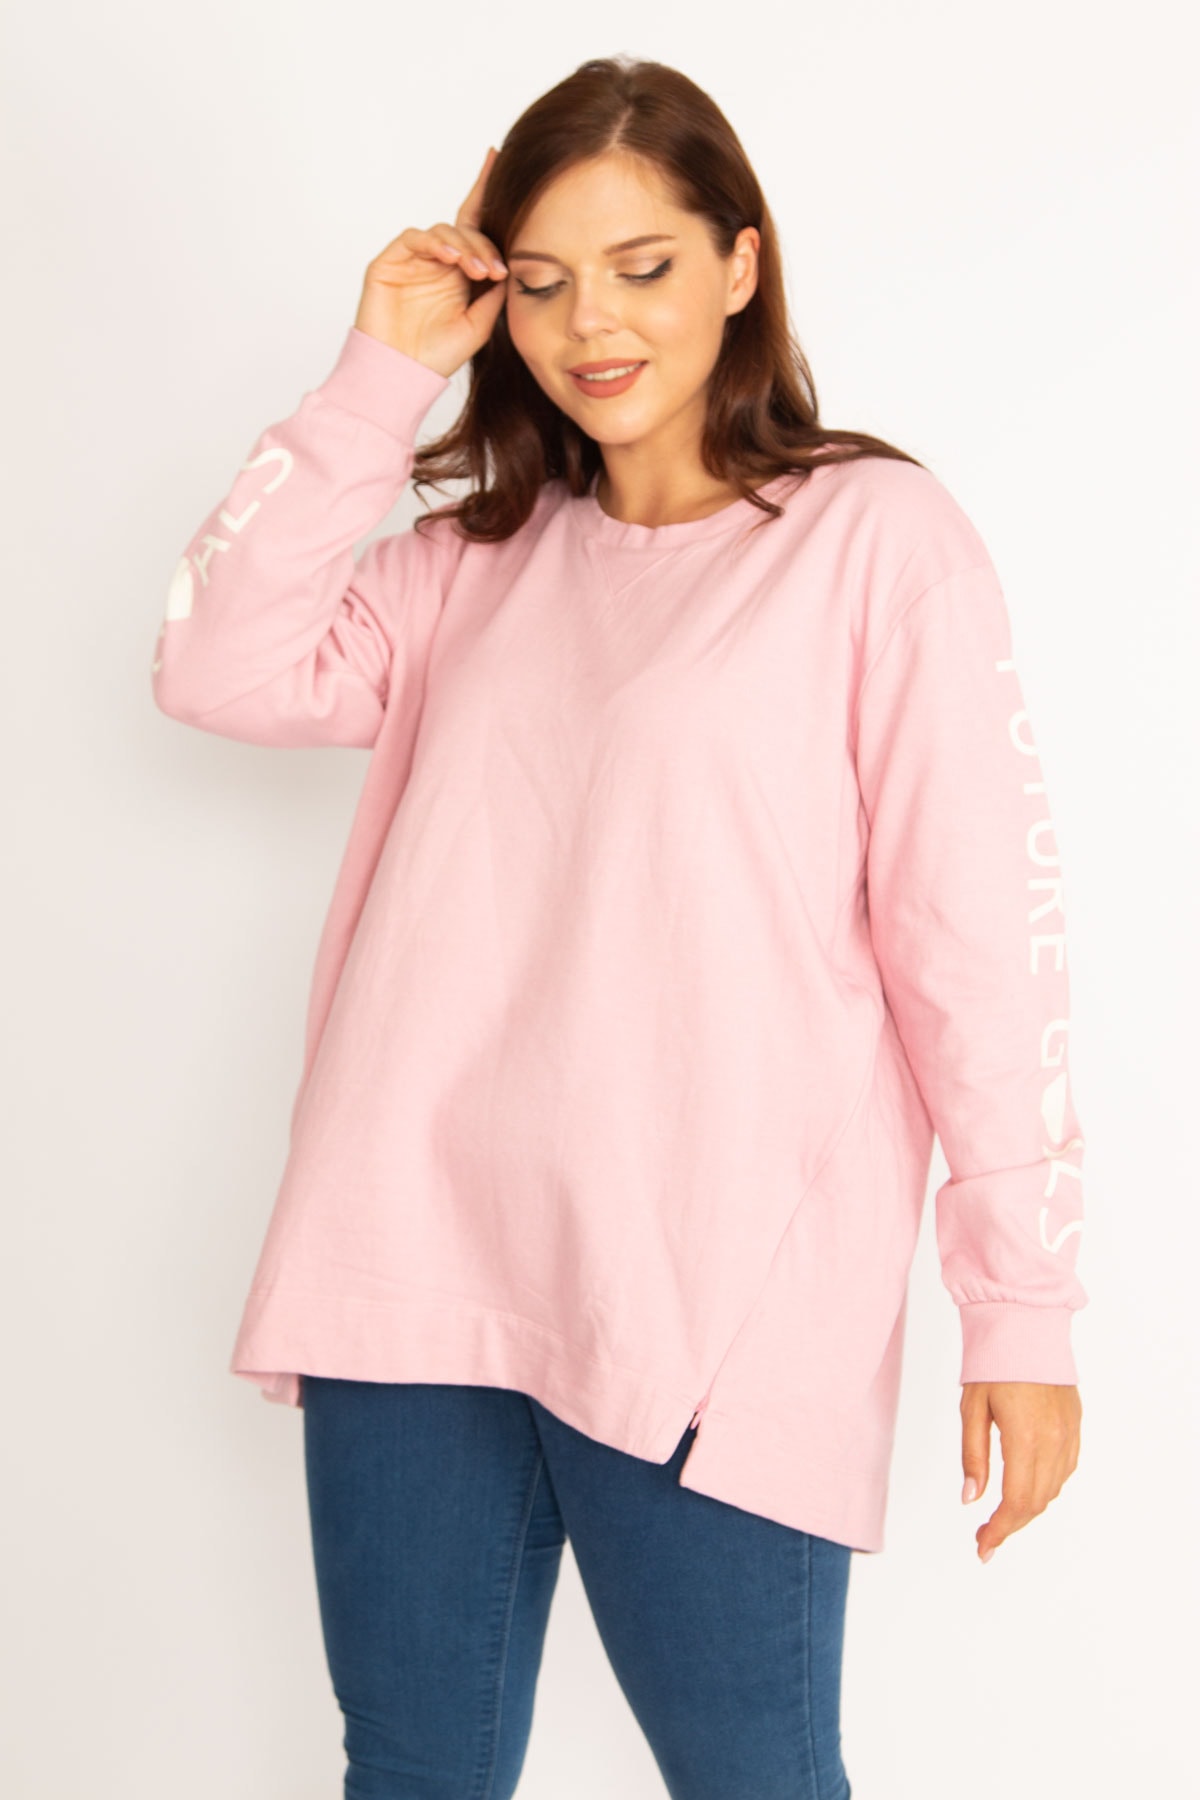 Şans Women's Pink Inner Framed Cotton Cotton Skirt With Two Side Zippers and Slits Sleeve Printed Sweatshirt.